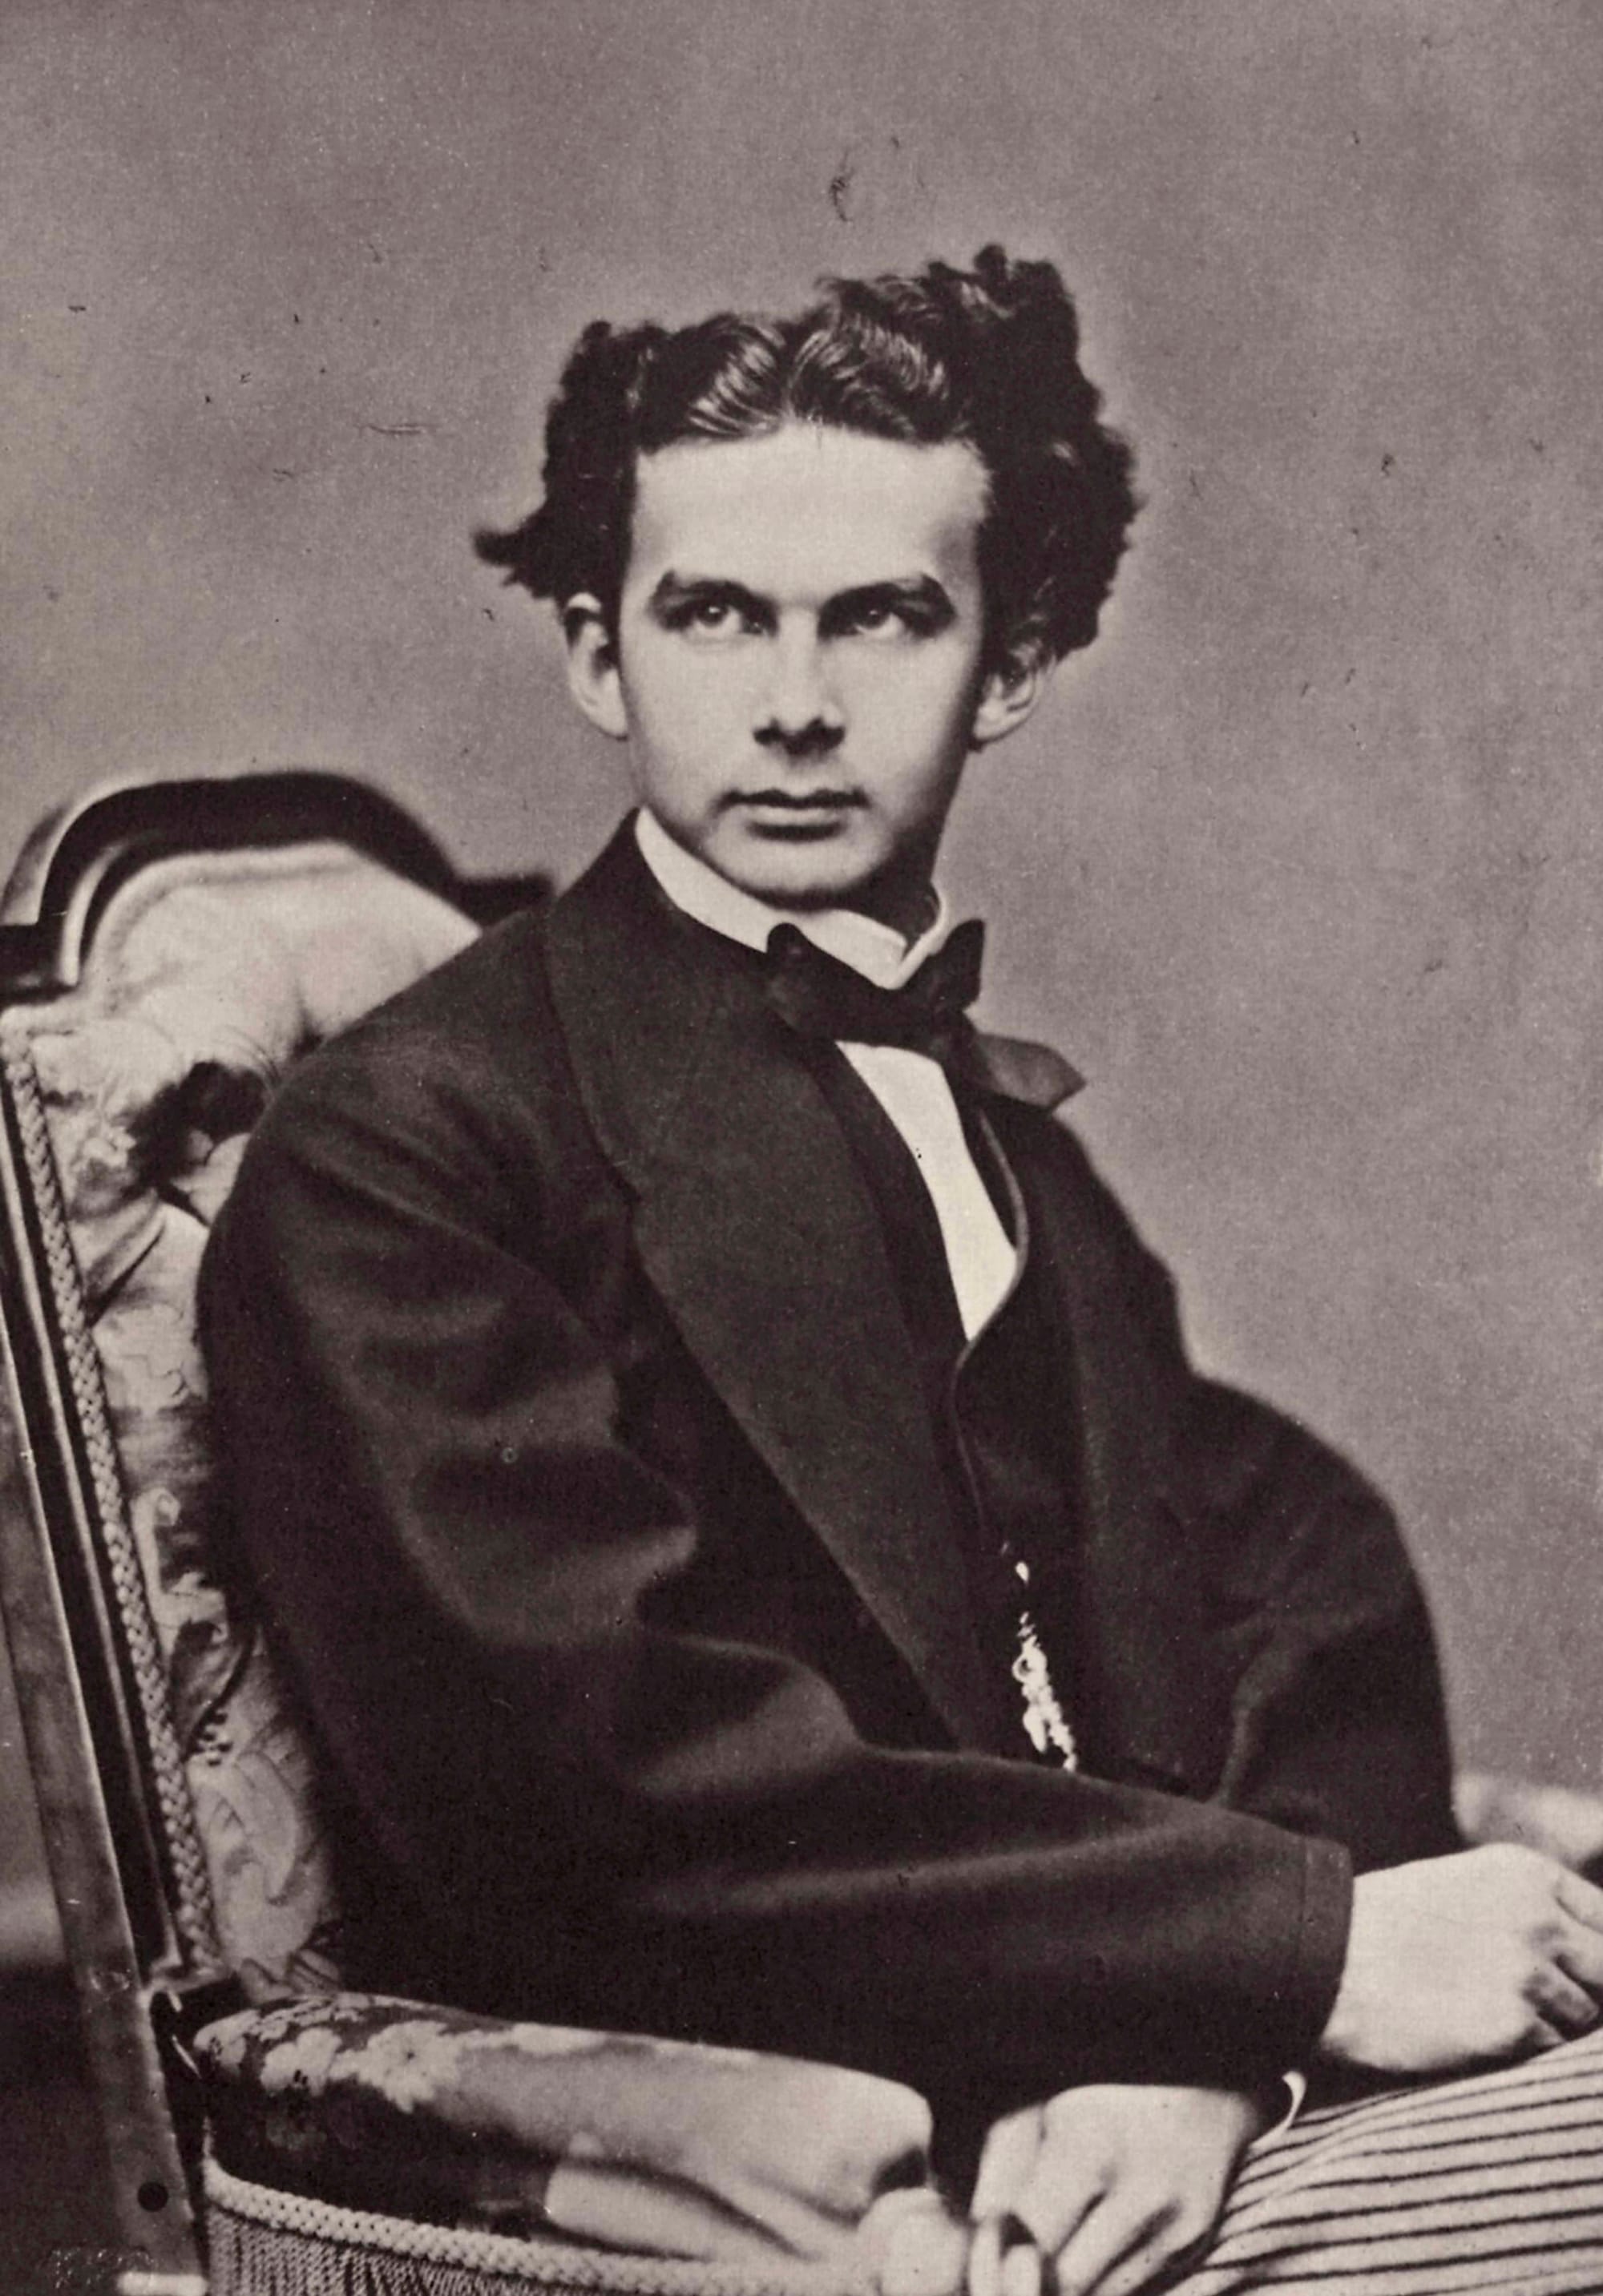 A photo of Ludwig, who had great wavy dark hair, wearing a bowtie and dark jacket, seated in an upholstered chair.